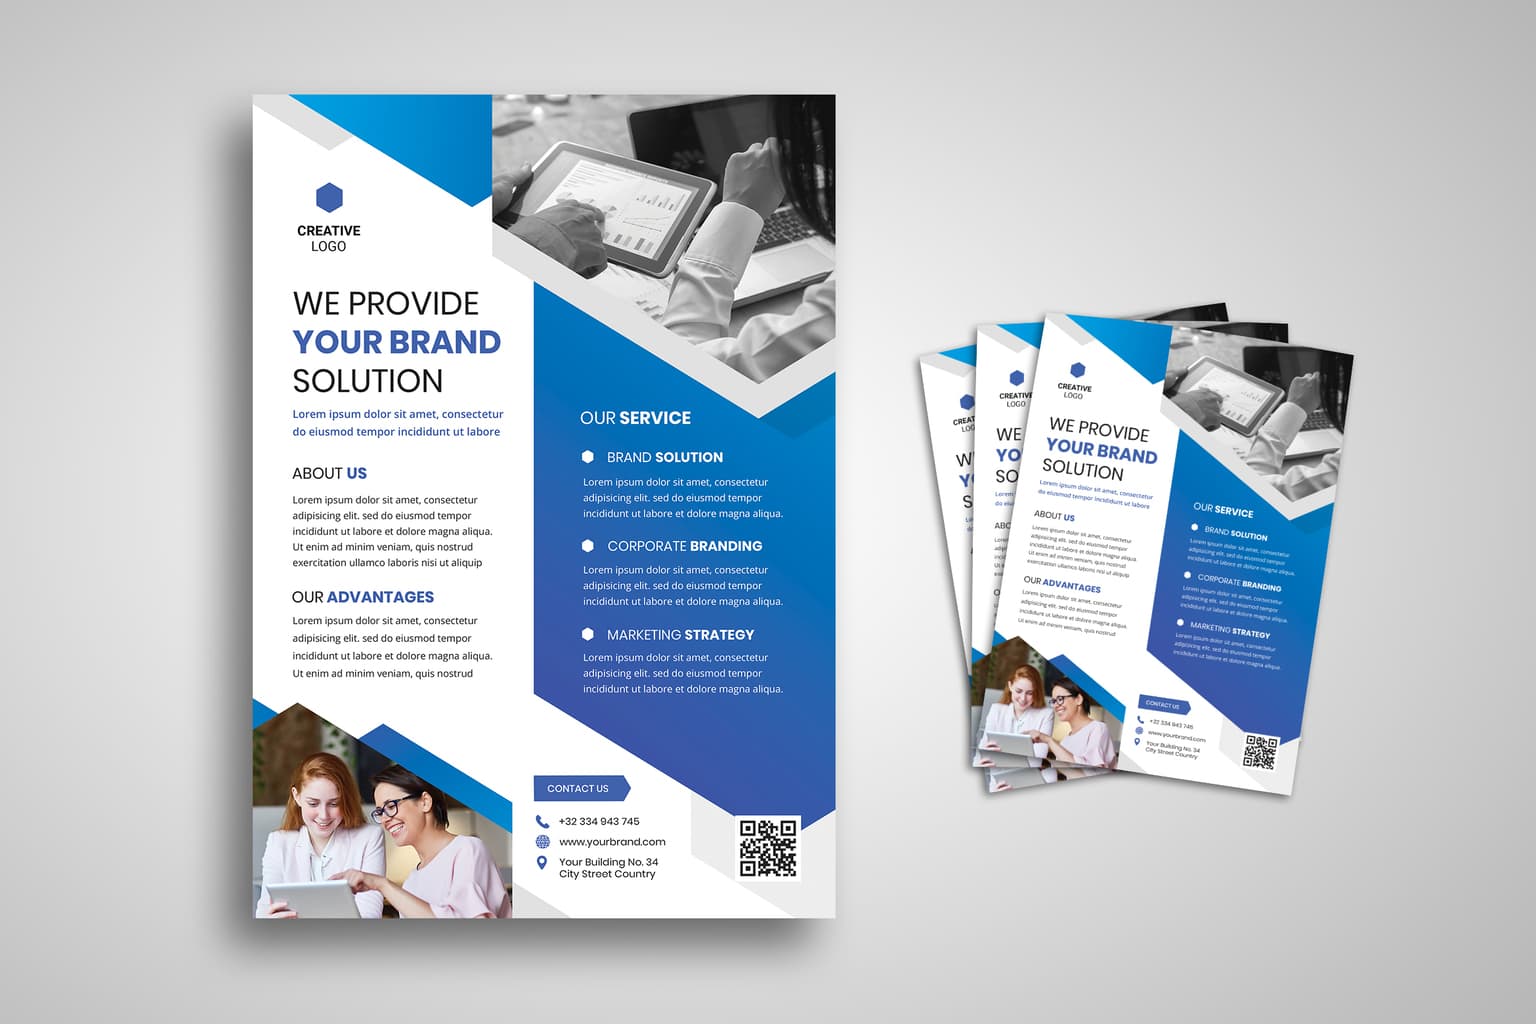 How to Design Flyers for Advertisements?